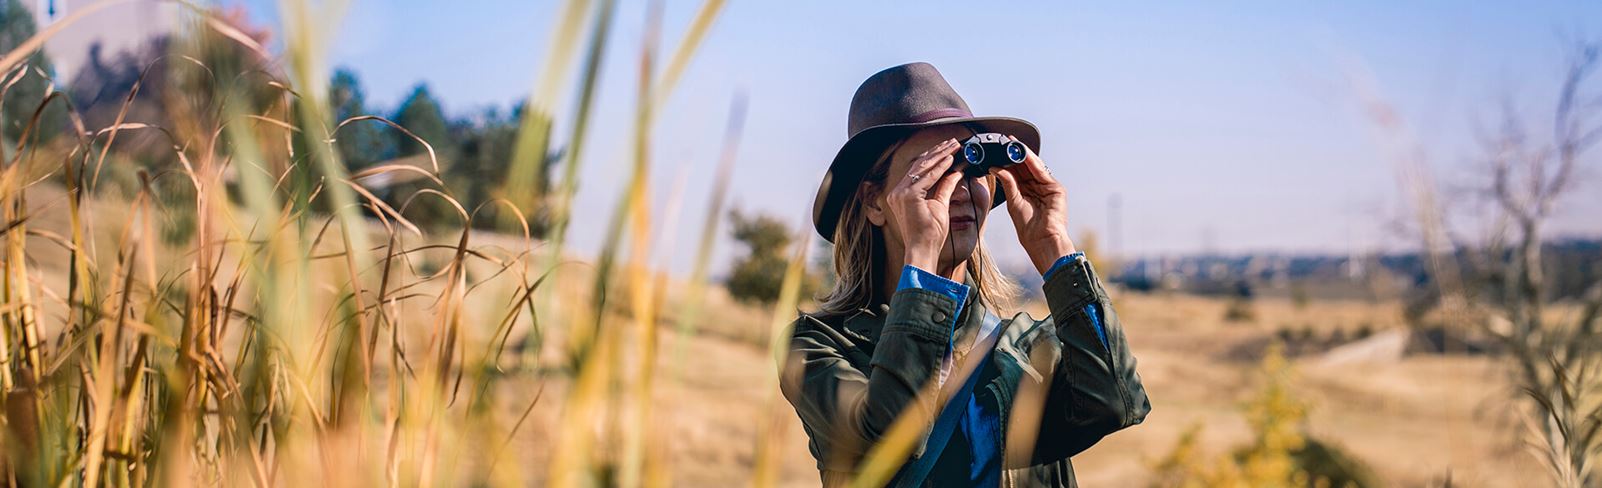 Woman with safari hat standing in Inspiration field with binoculars.